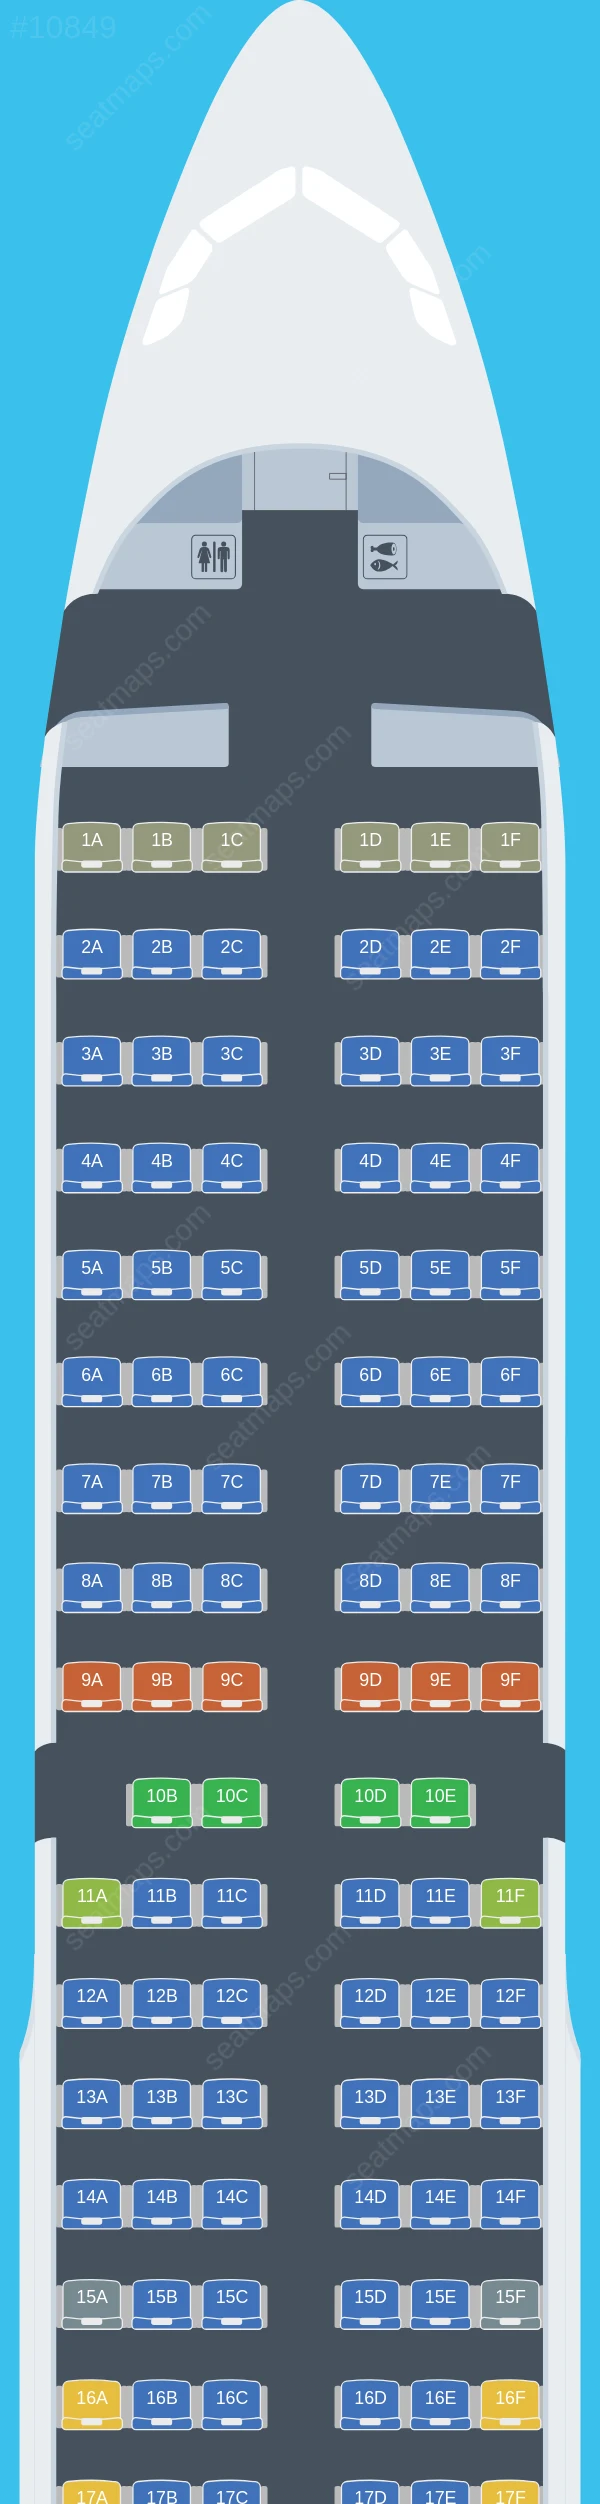 LATAM Airlines Airbus A321-200 seatmap preview